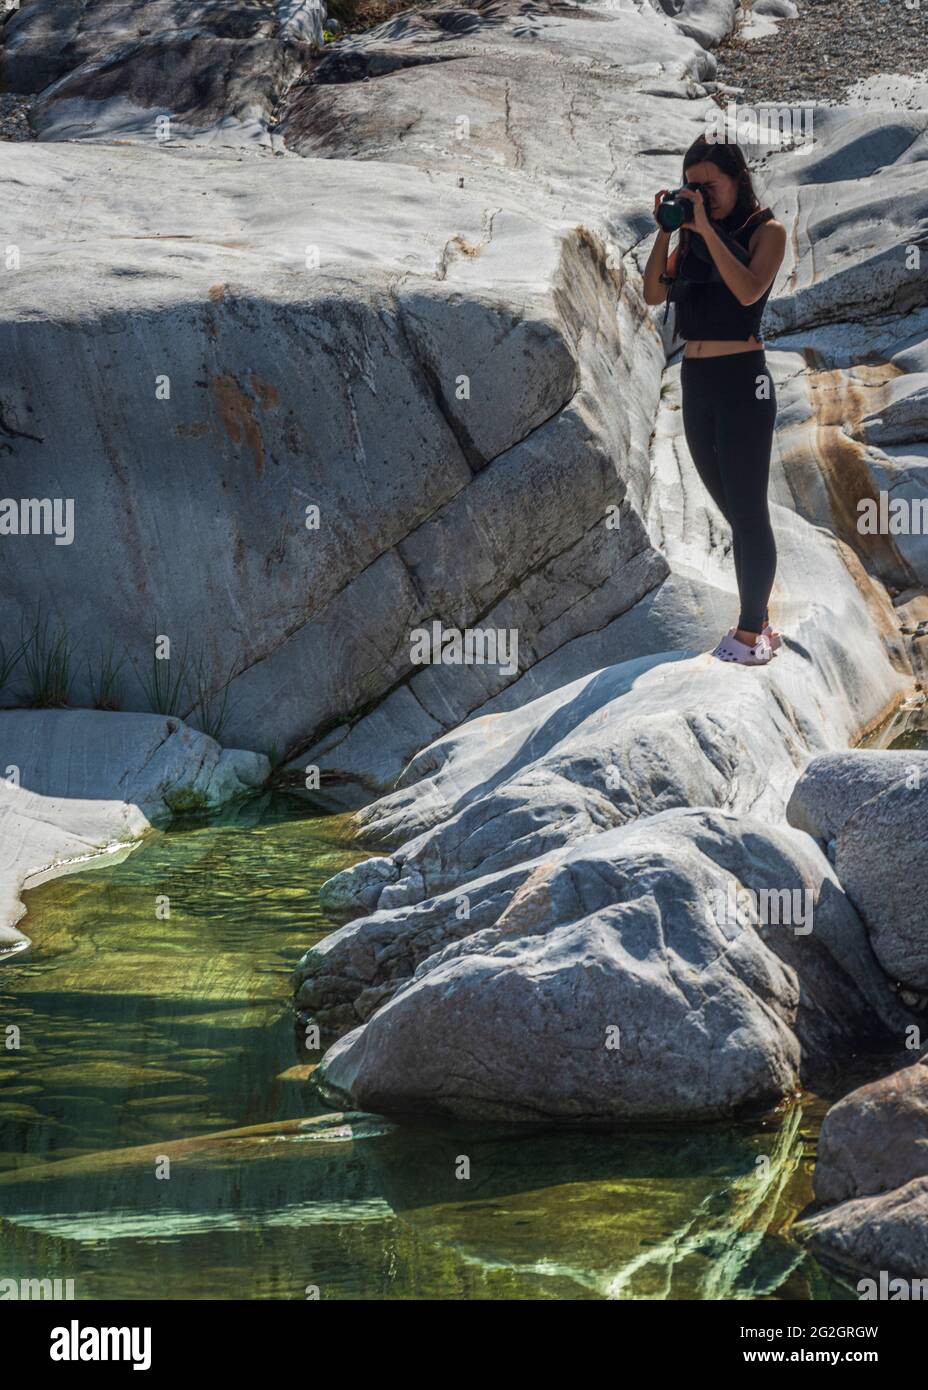 Impressions from Lavertezzo in the Verzasca Valley, Locarno district, Canton Ticino in Switzerland: popular excursion destination for hiking, river diving and swimming. Young woman taking photos. Stock Photo